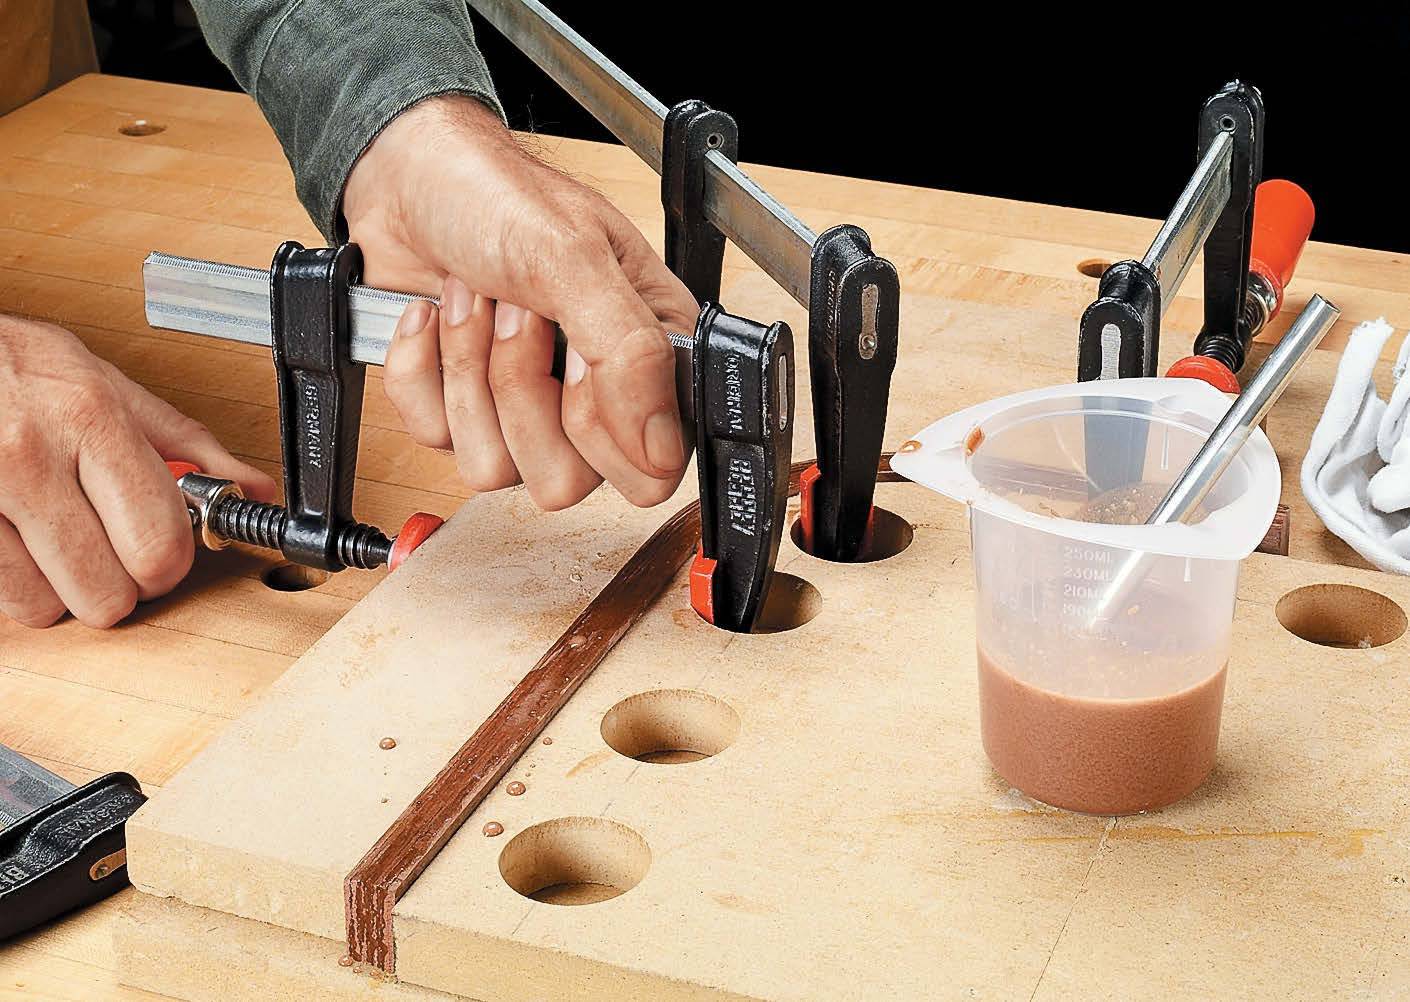 Adhesives 101 for Woodworkers